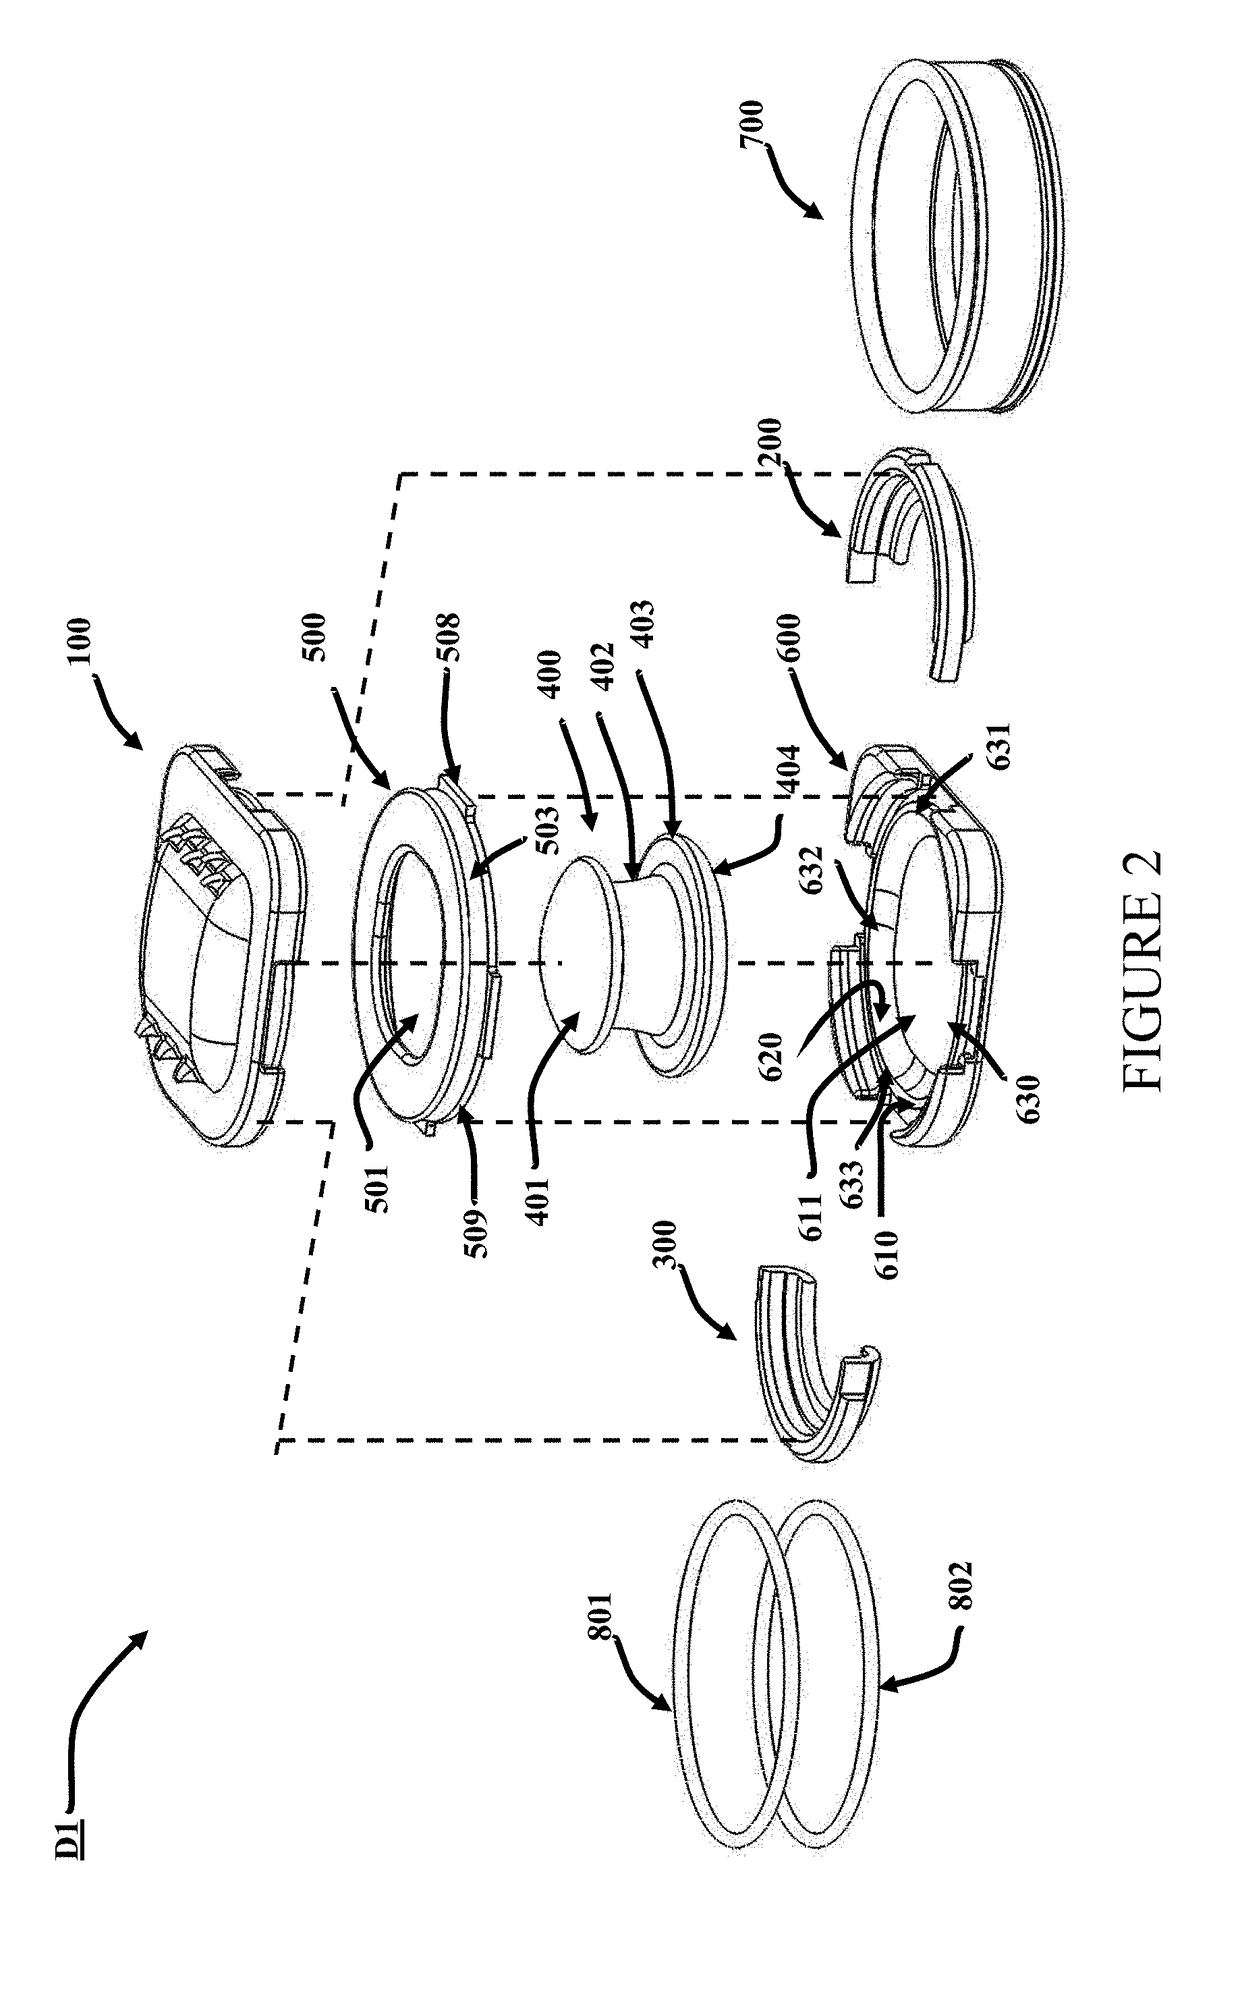 Motion preserving spinal total disc replacement apparatus, method and related systems